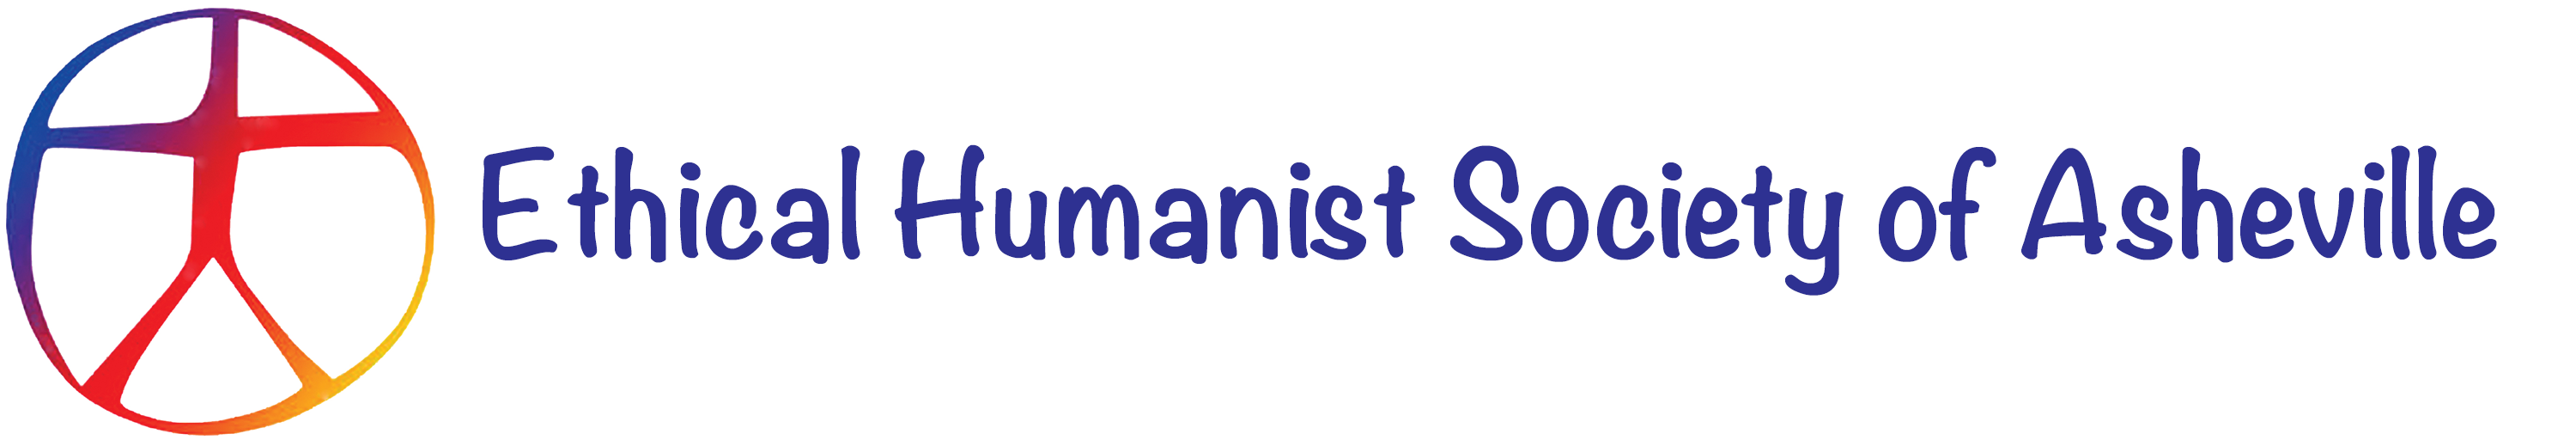 Ethical Humanist Society of Asheville